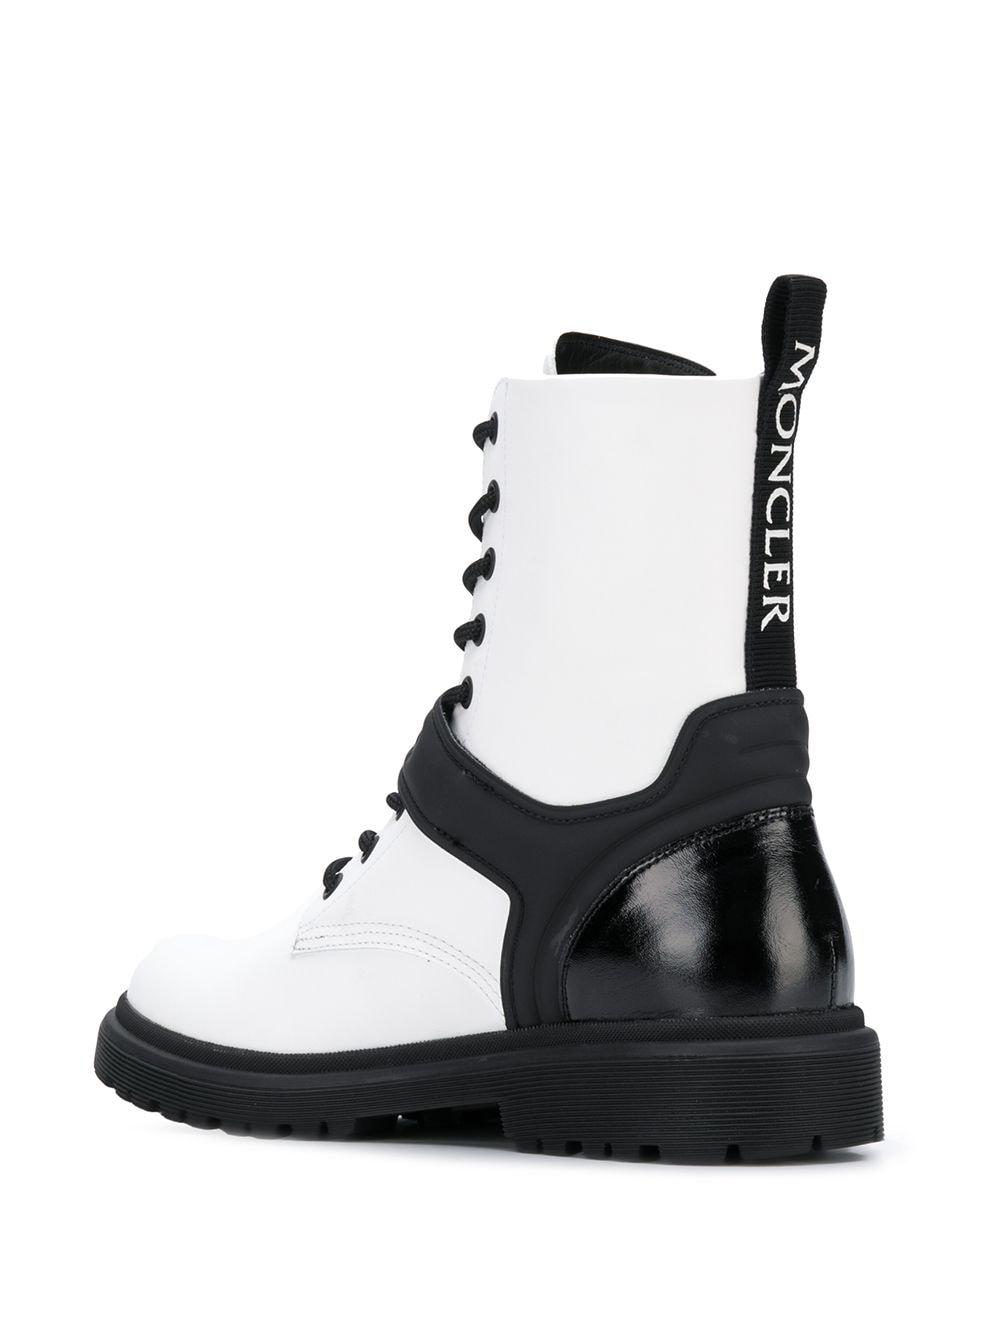 Moncler Leather Calypso Boots in White - Lyst